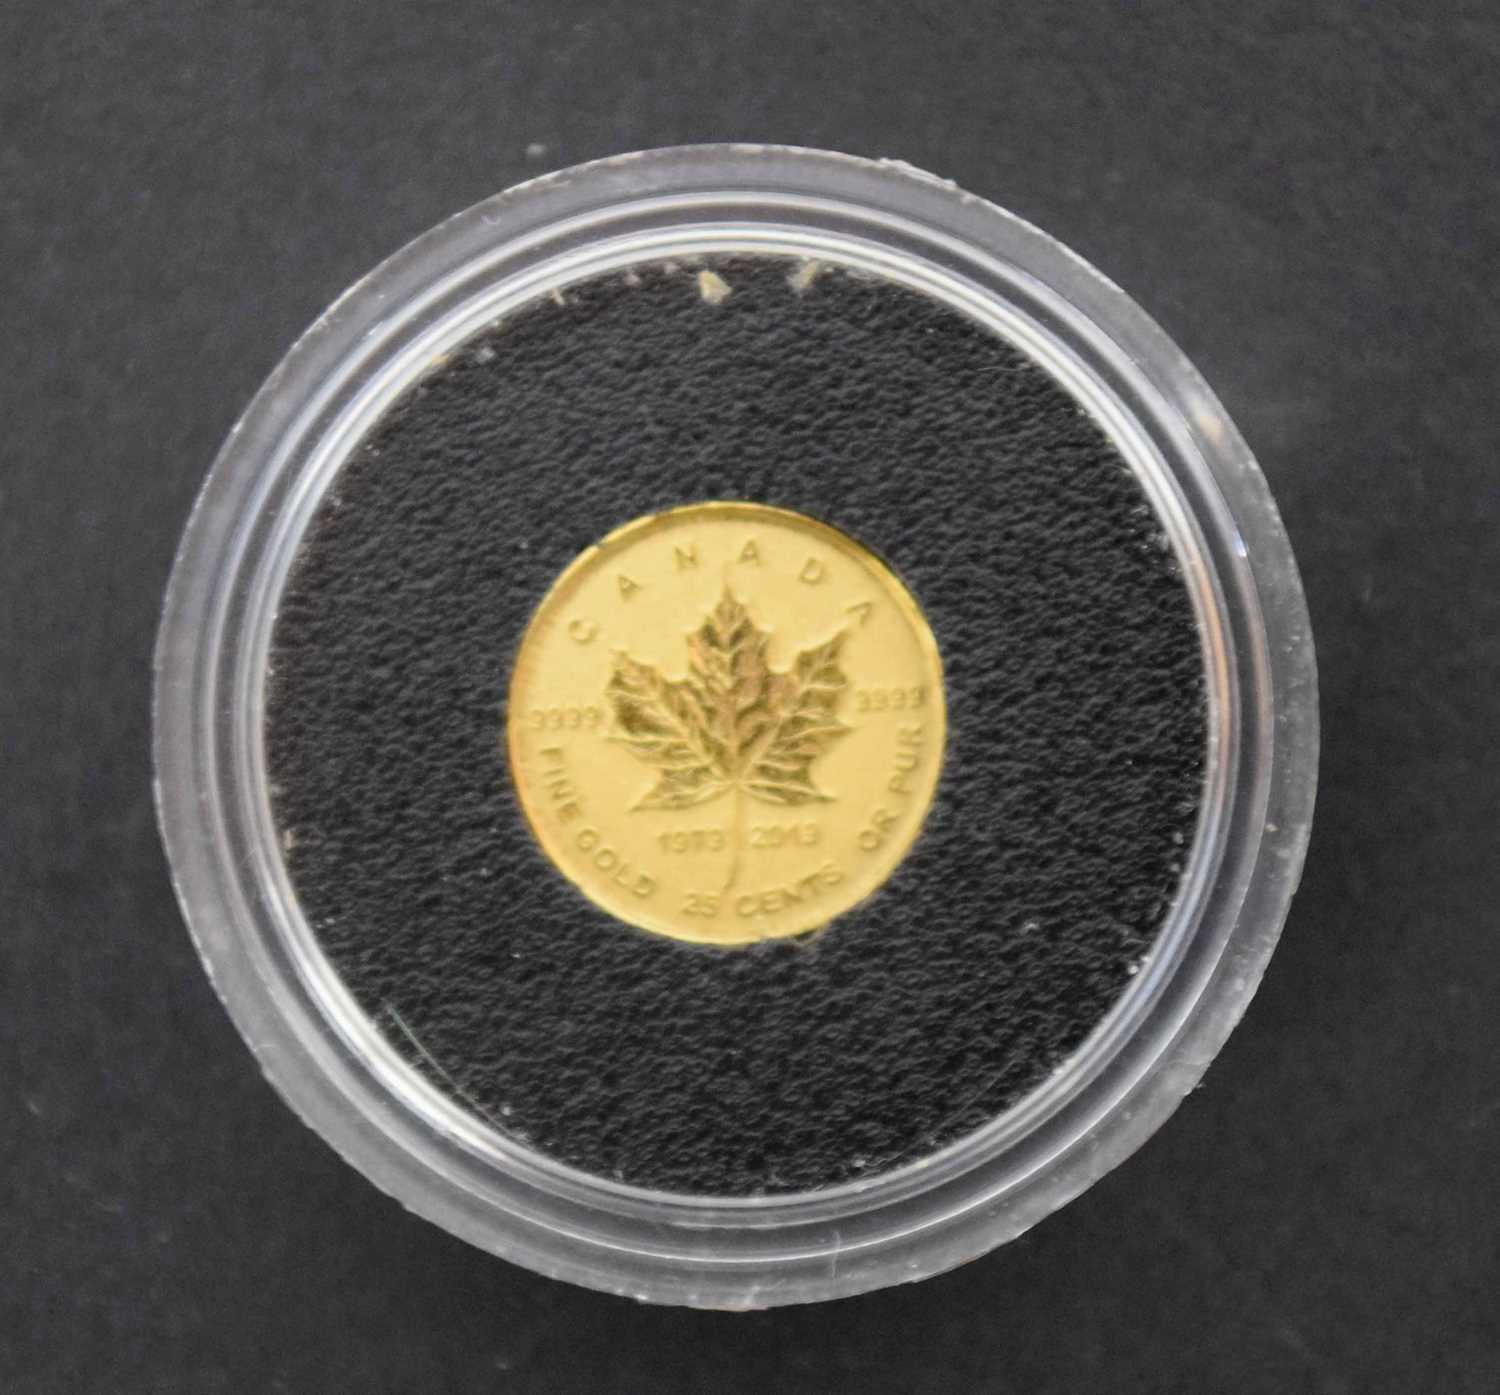 1919 Canadian 25c gold maple leaf 40th anniversary coin, .5gms - Image 2 of 2